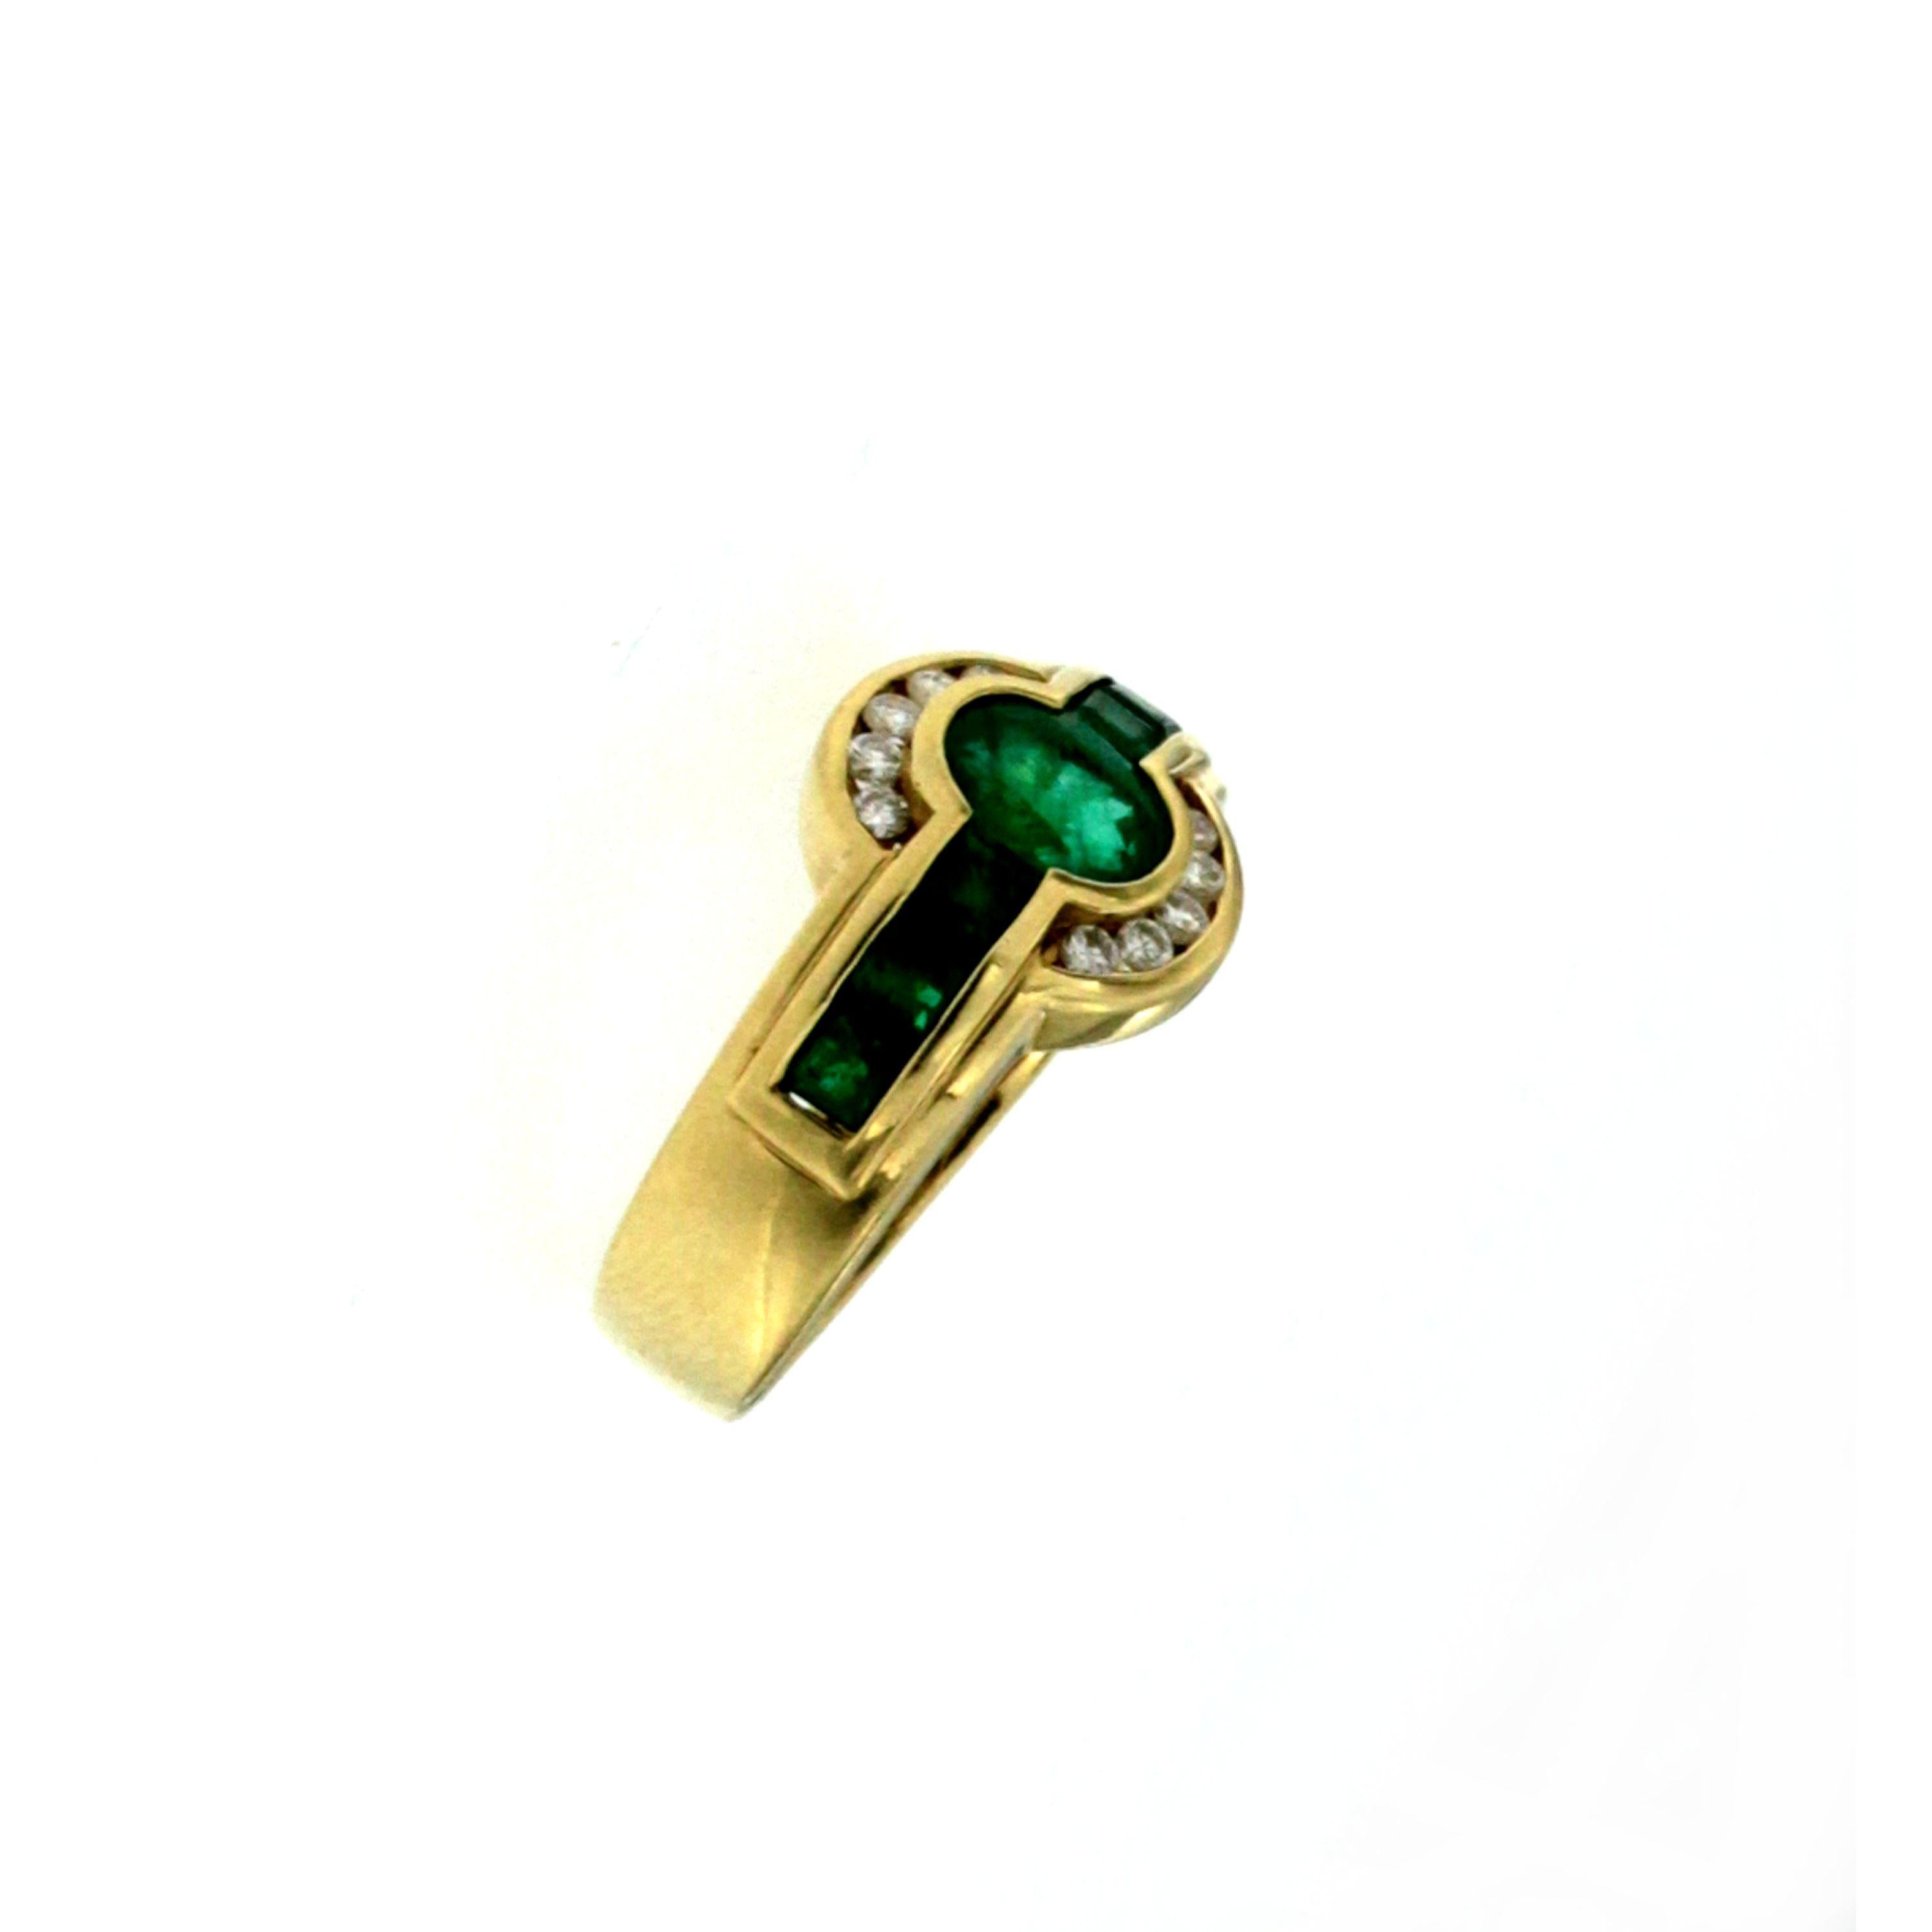 Stunning band ring, hand-crafted in 18k yellow gold, origin 1970 Italy
It is set with one large Vivid Colombian Oval Emerald in the center and at the two sides two rows of 6 custom cut smaller Emeralds, same quality, all surrounded by 10 round